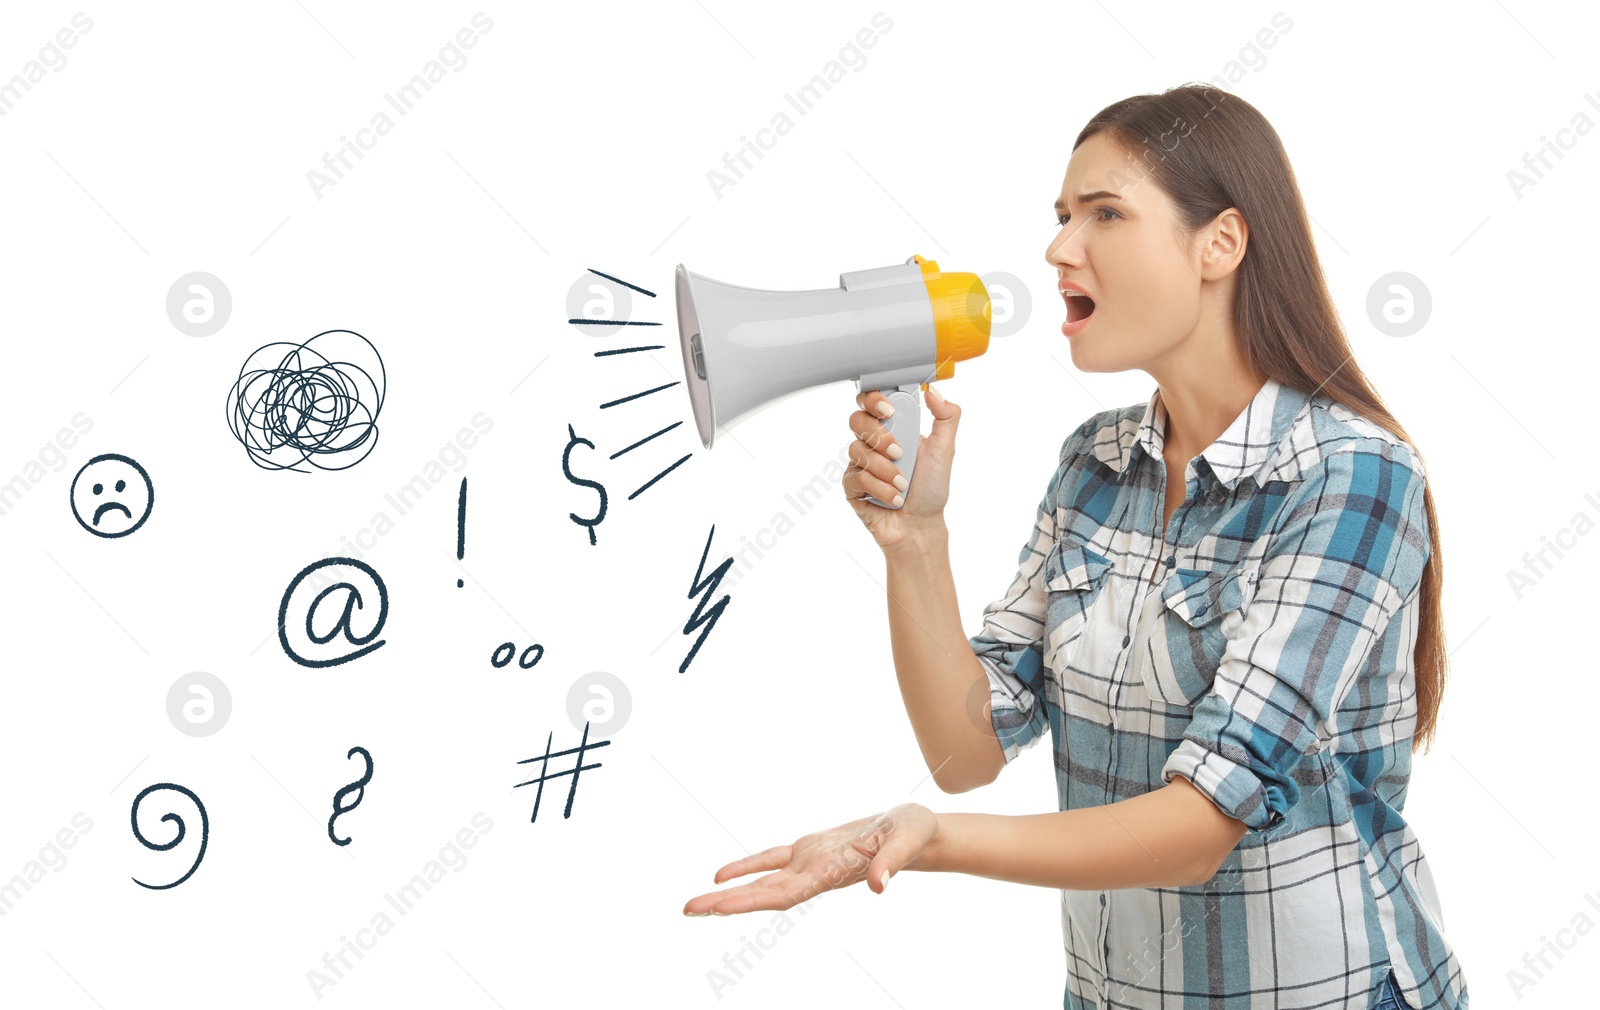 Image of Complaint. Young woman with megaphone and illustrations on white background